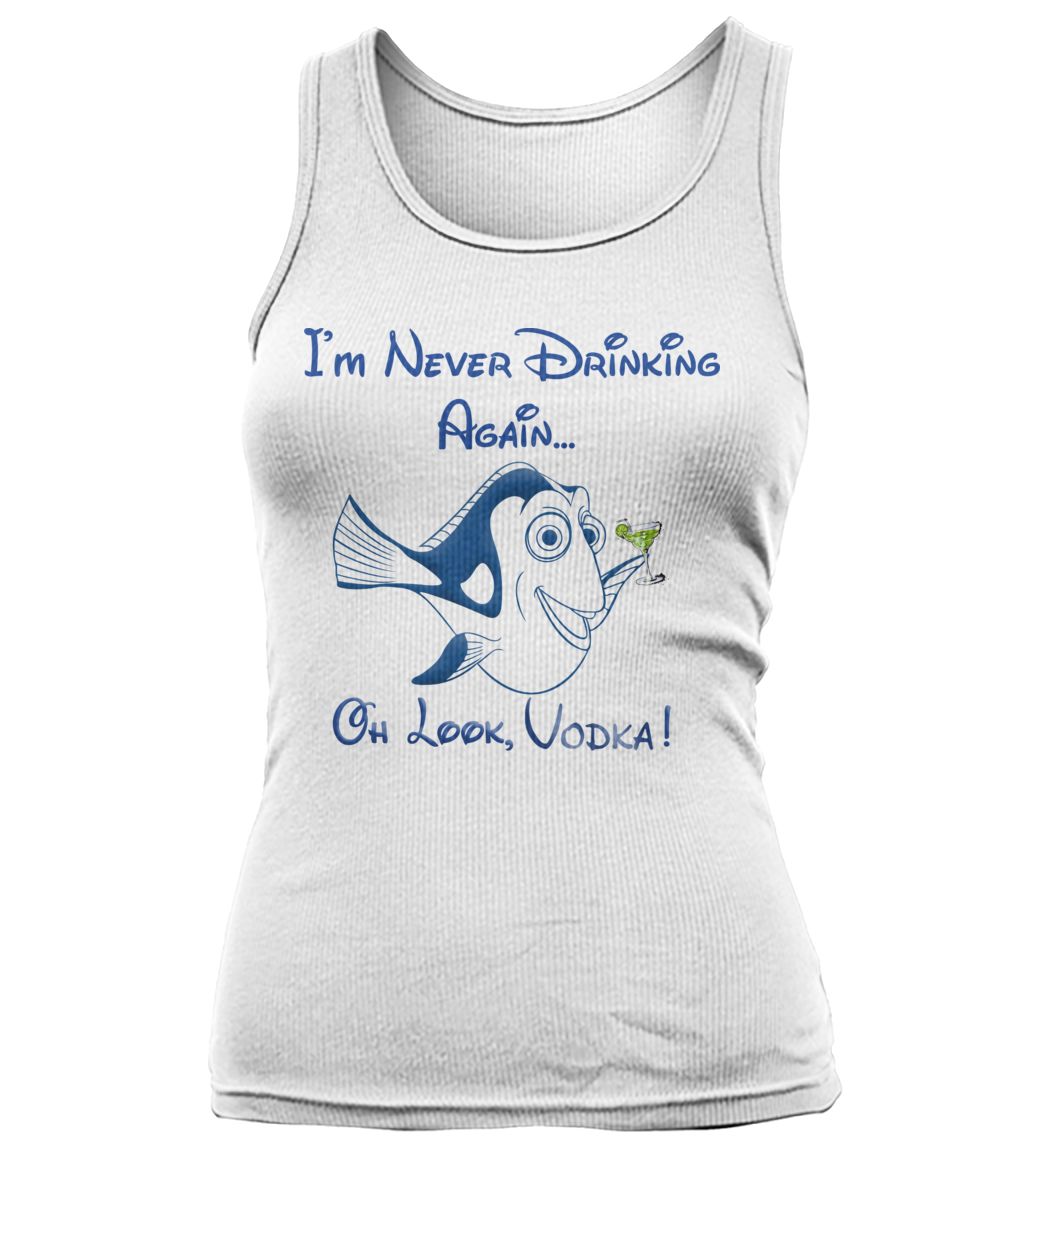 Dory fish I’m never drinking again oh look vodka women's tank top